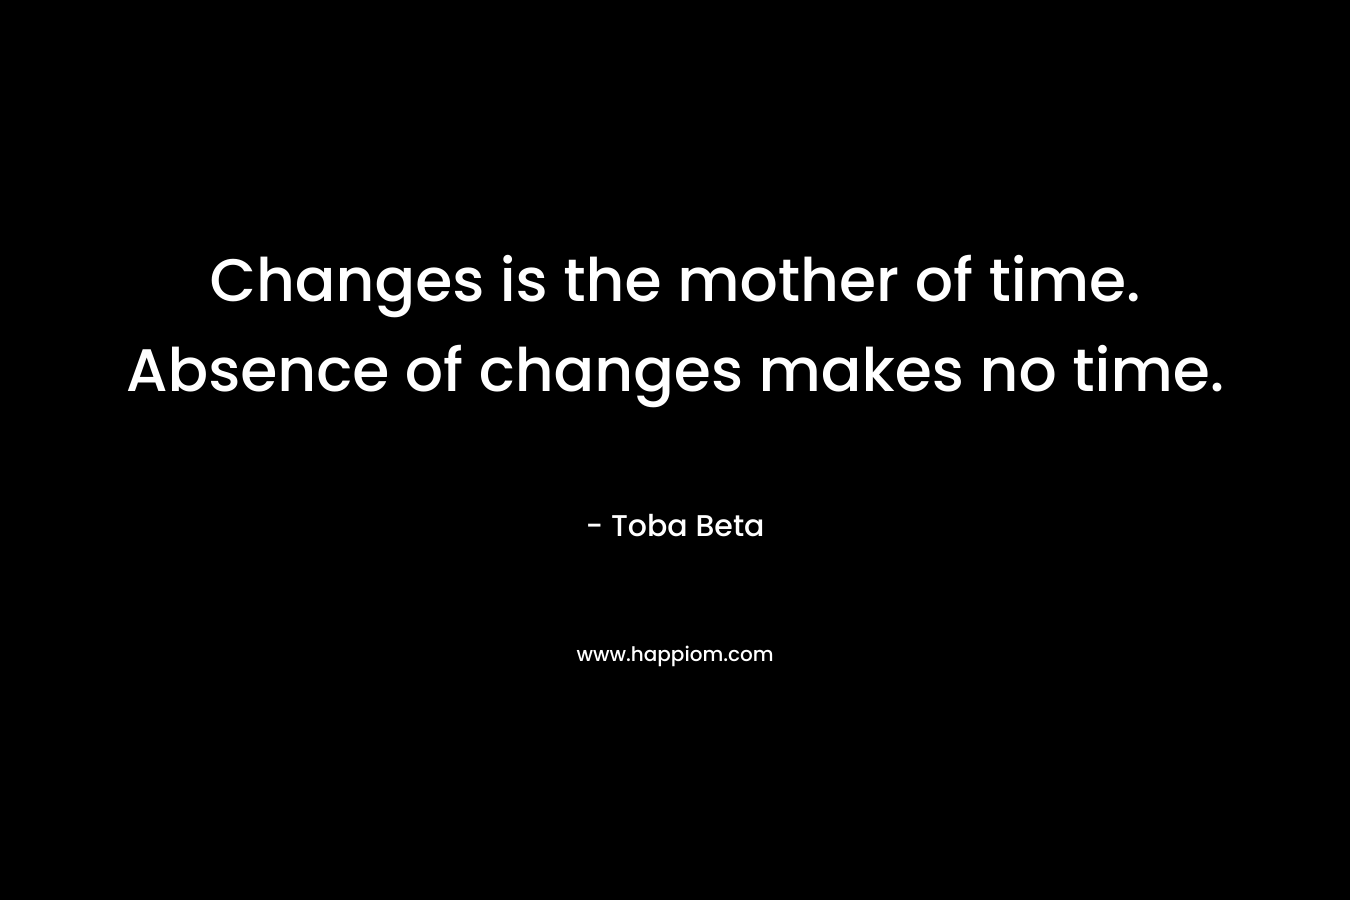 Changes is the mother of time. Absence of changes makes no time.